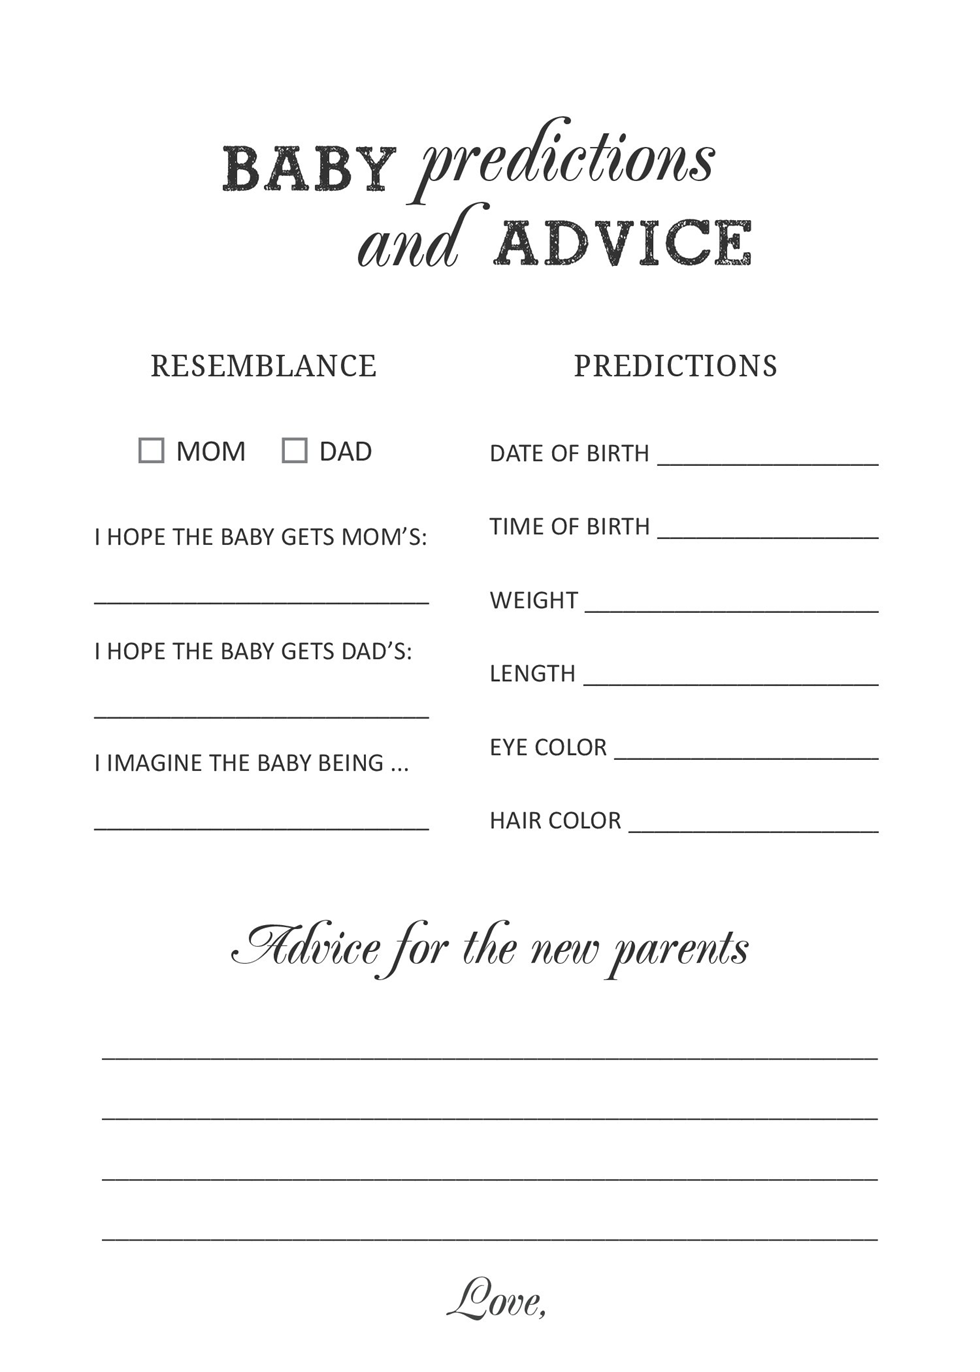 Baby Prediction and Advice Cards